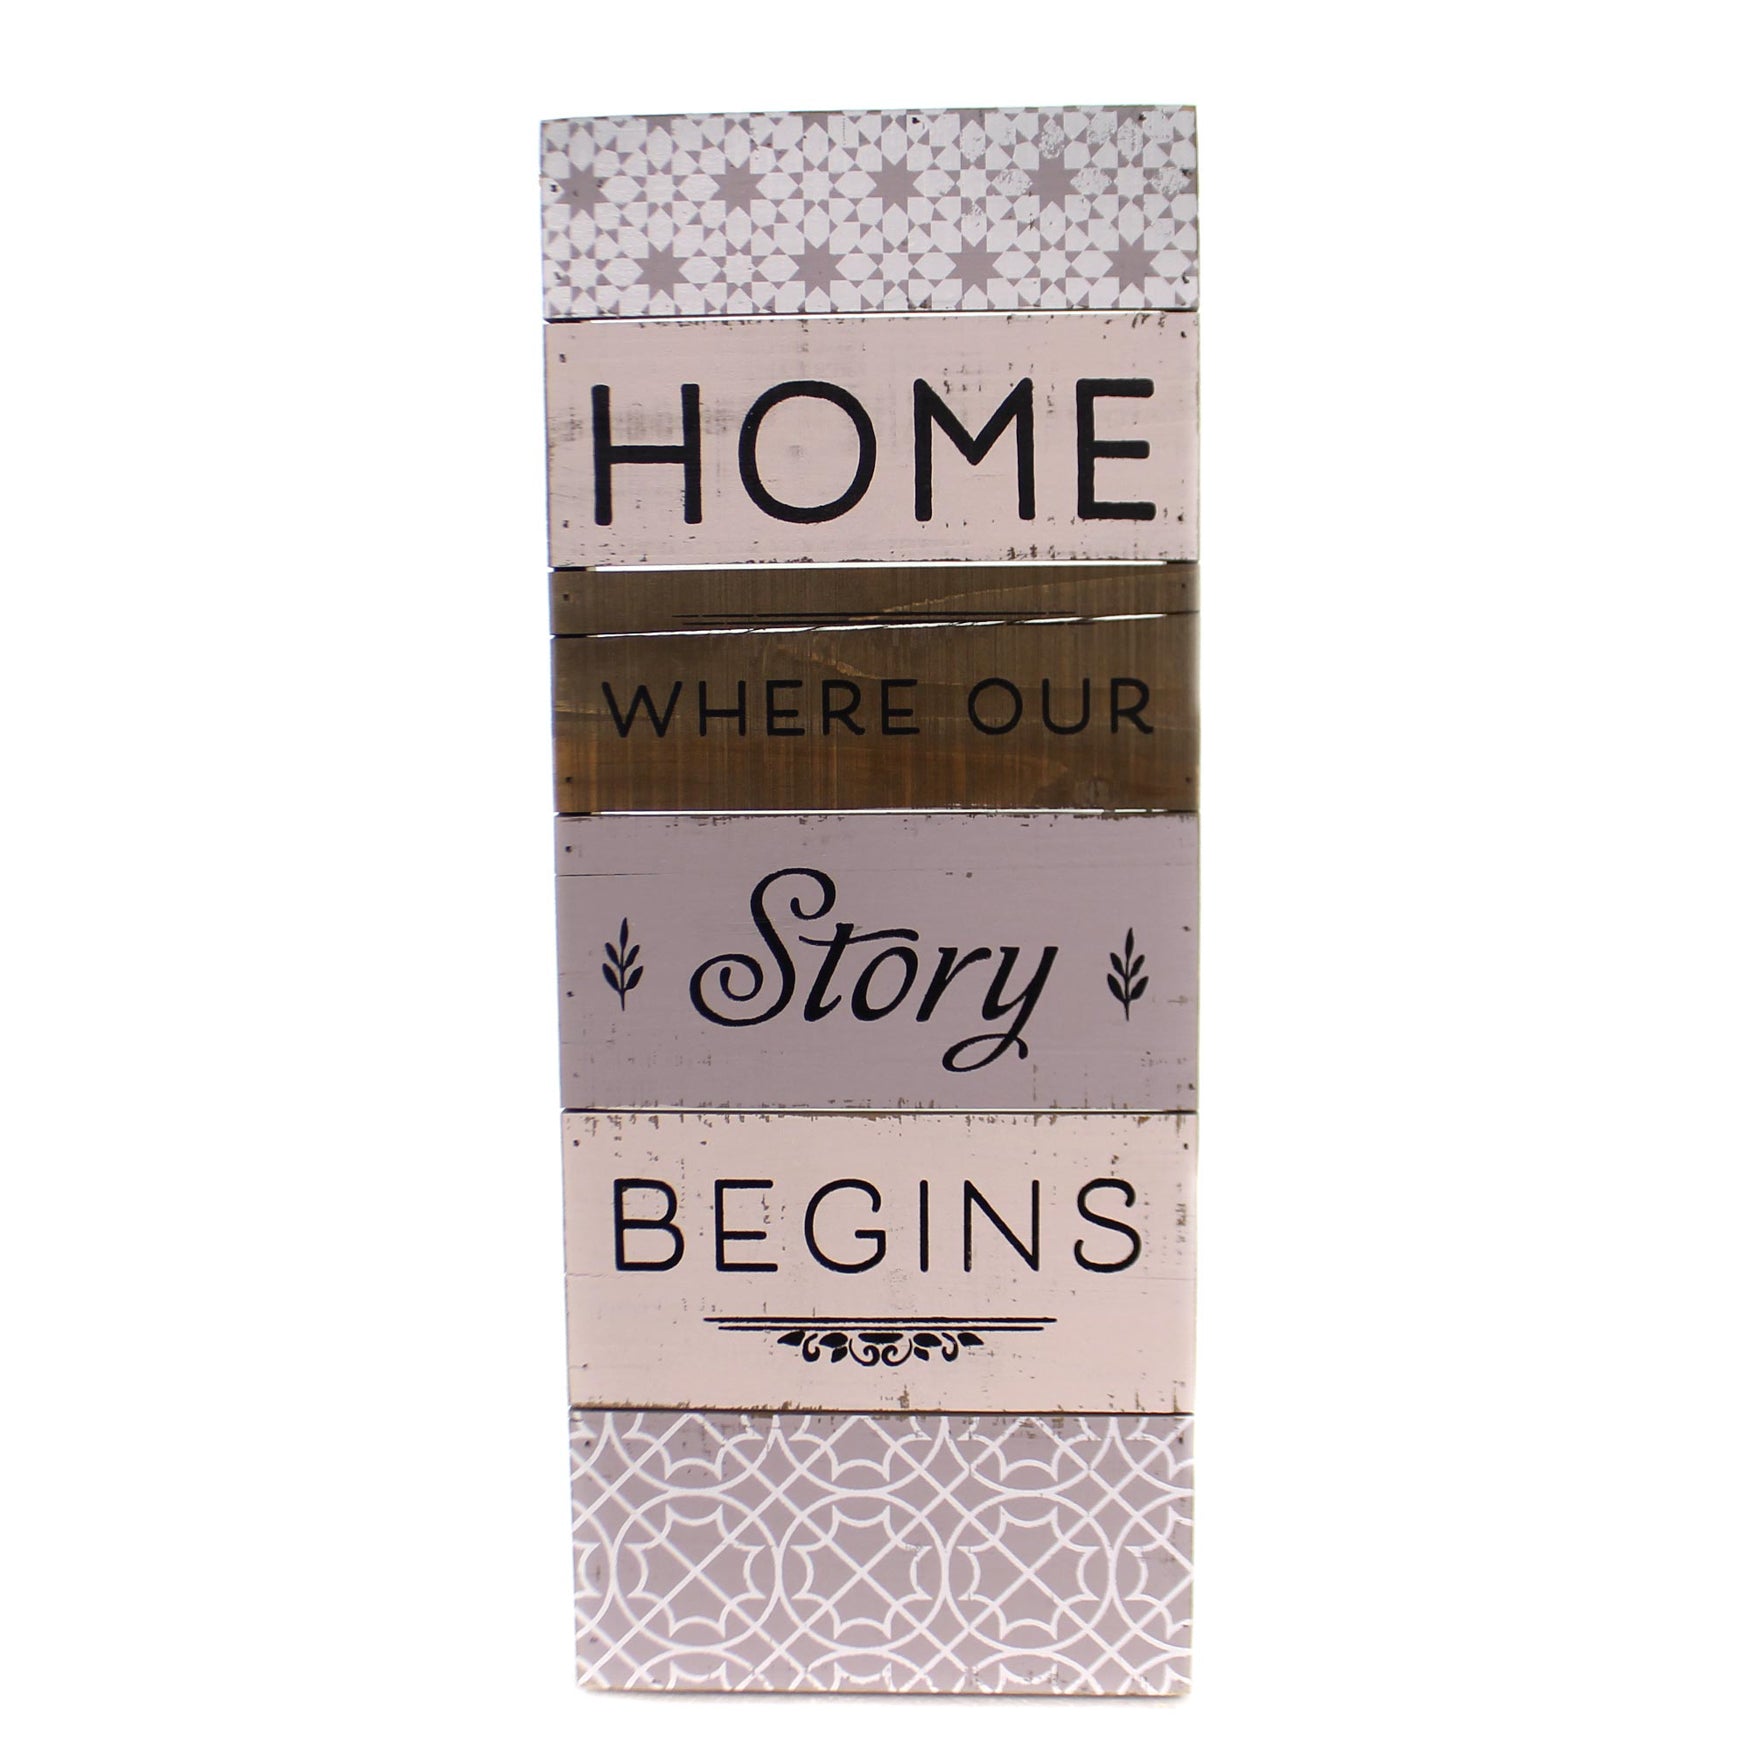 Home Decor Home Is Where Our Story Begins Home Decor Sbkgifts Com